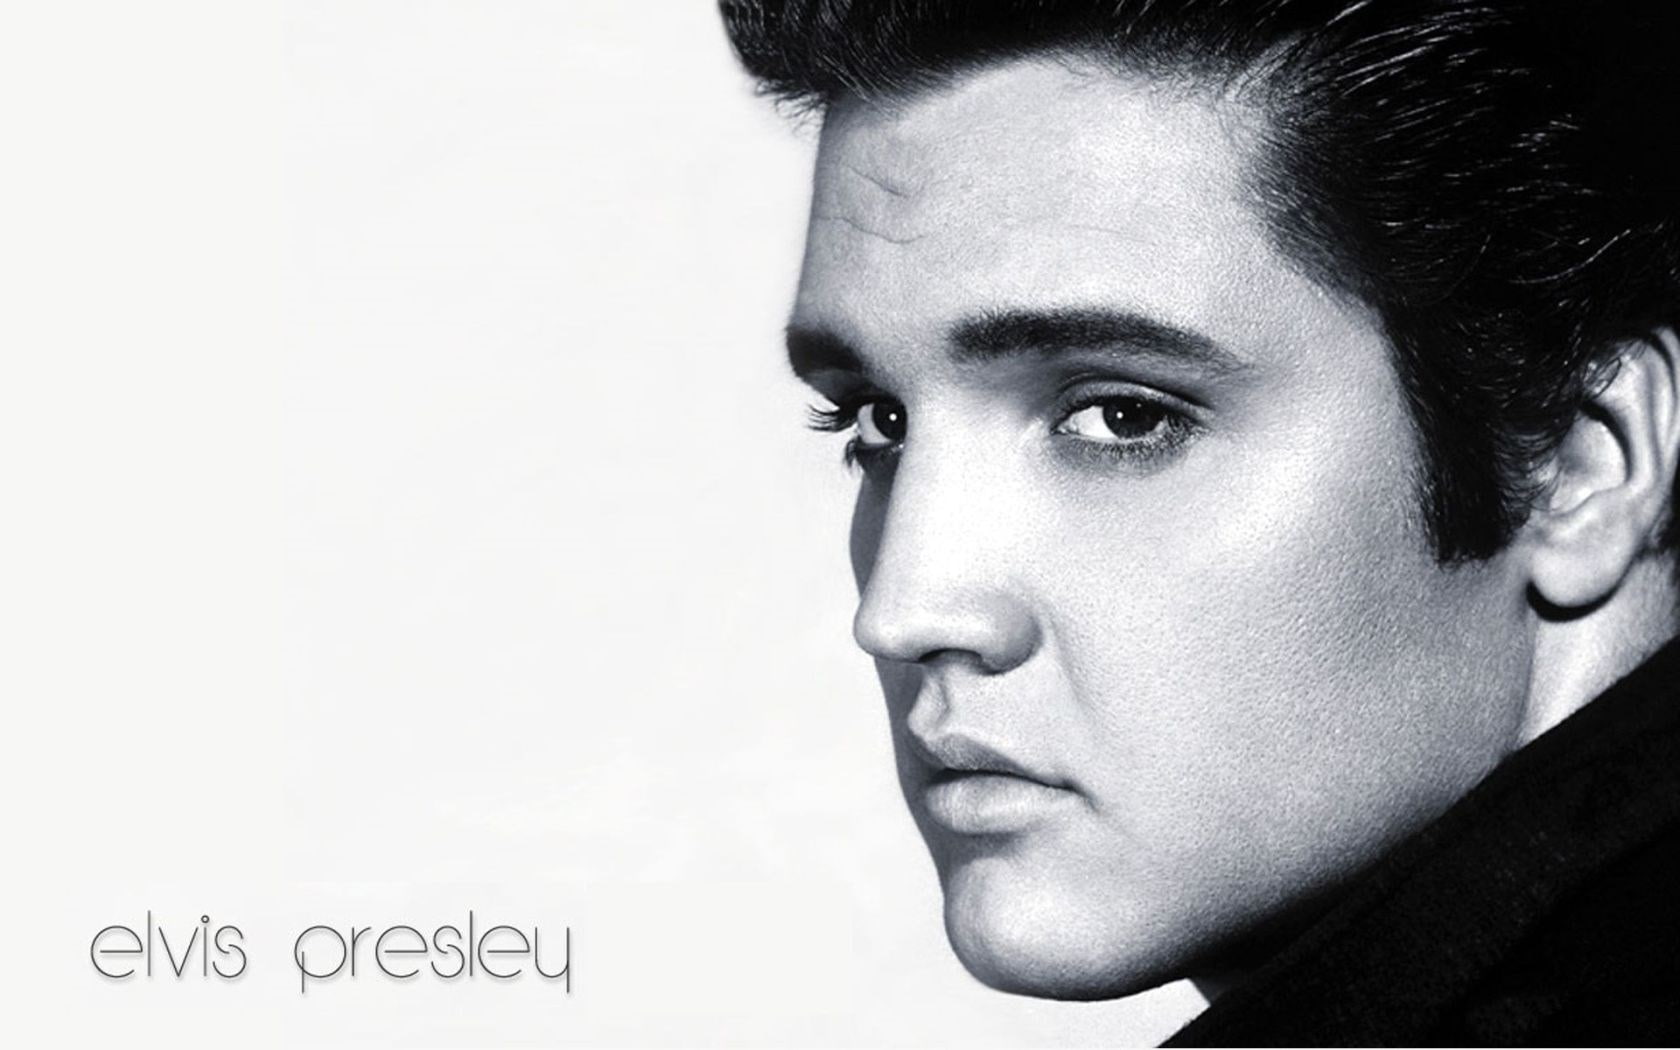 elvis presley, portrait, one person, young adult, headshot